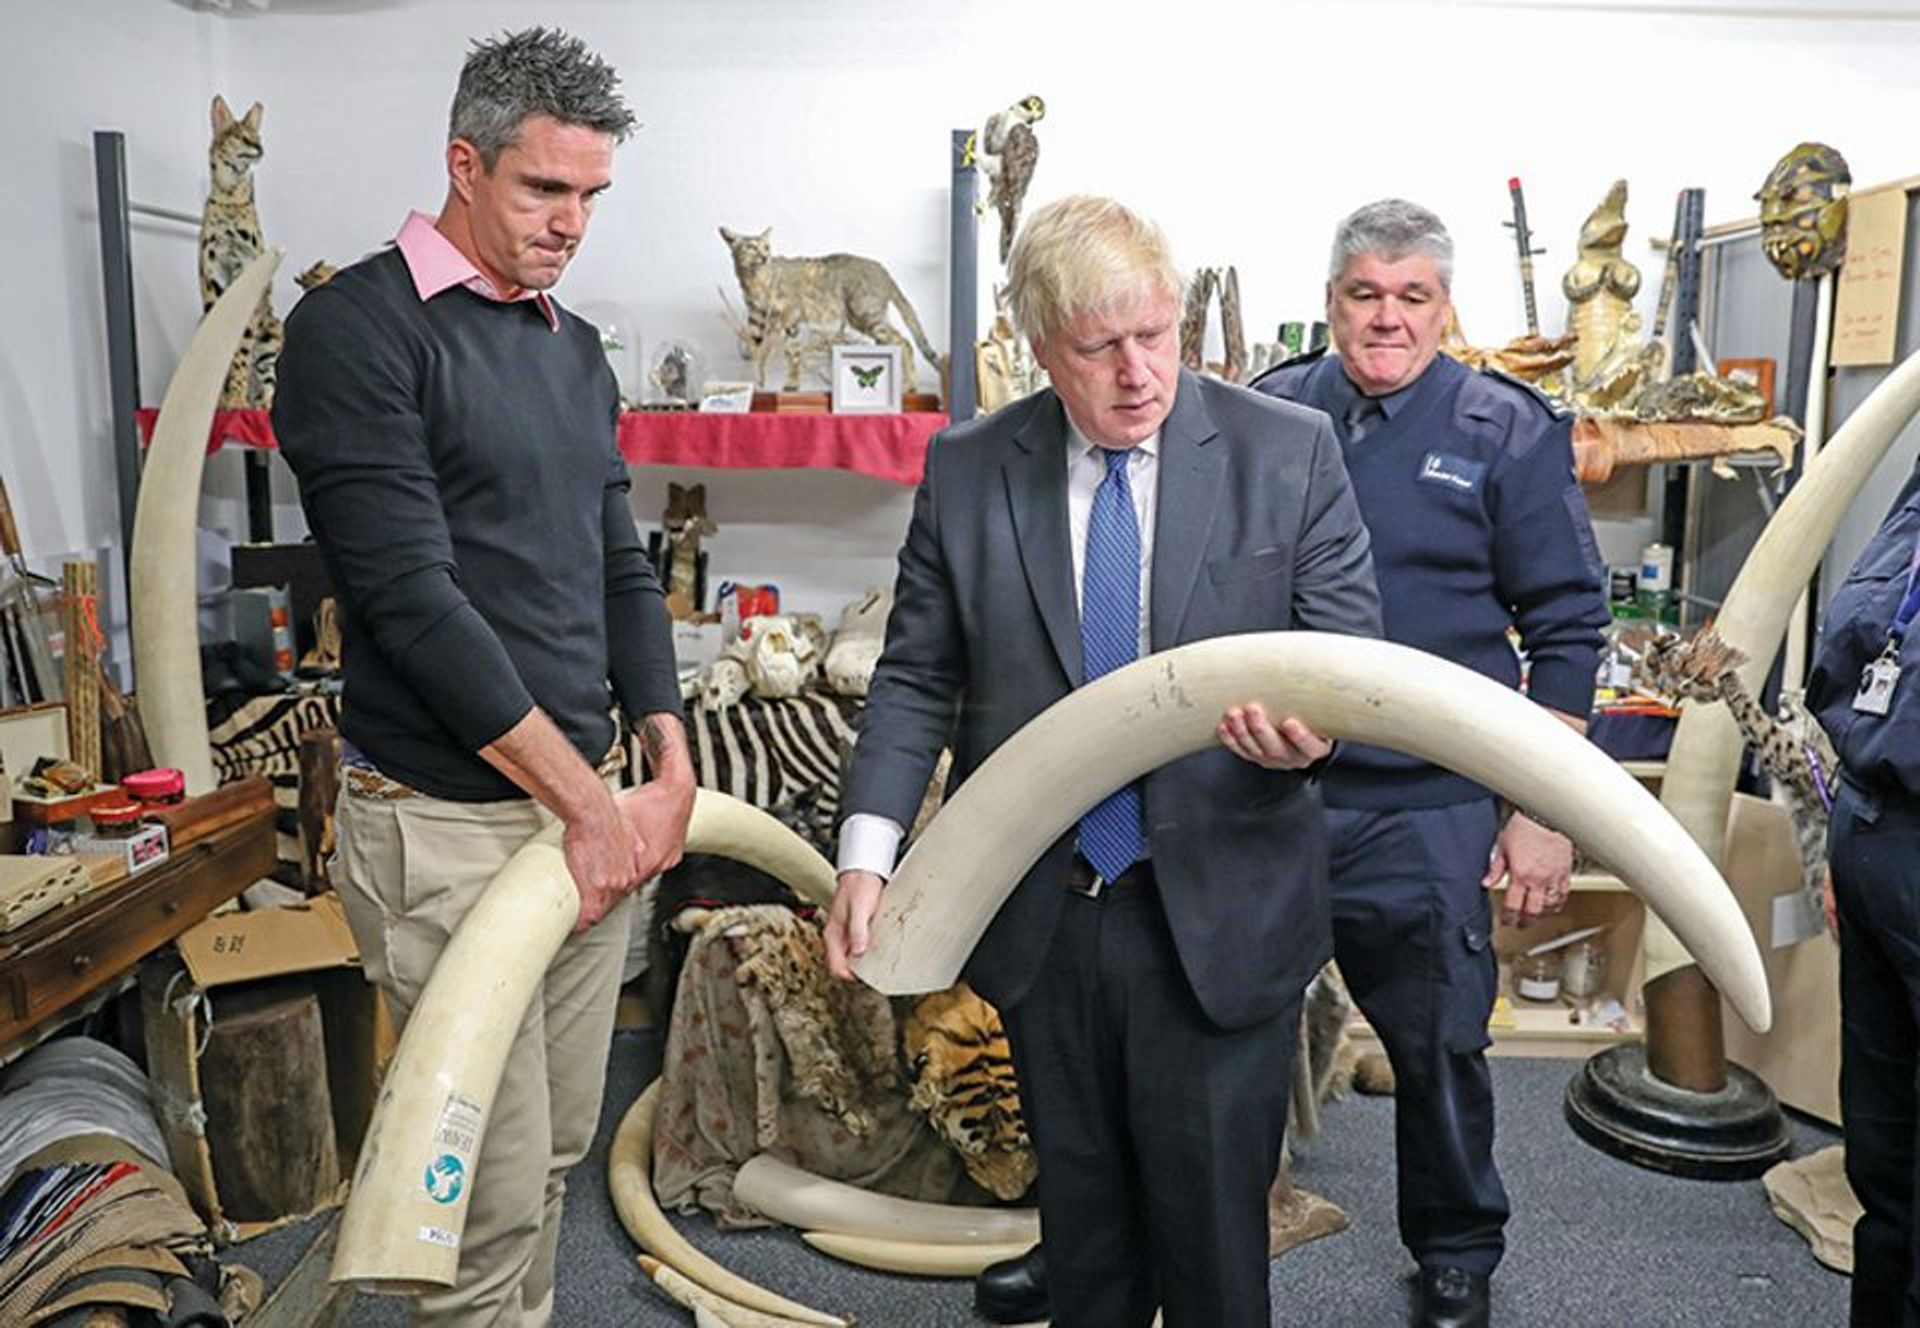 UK politicians such as Boris Johnson—pictured with former England cricketer Kevin Pietersen (far left)—think they are stopping the trade in “bloody tusks”, but the UK trade in new ivory is negligible compared with antique worked items like this veneered tea caddy of around 1800 © Andrew Matthews/Pool via Reuters